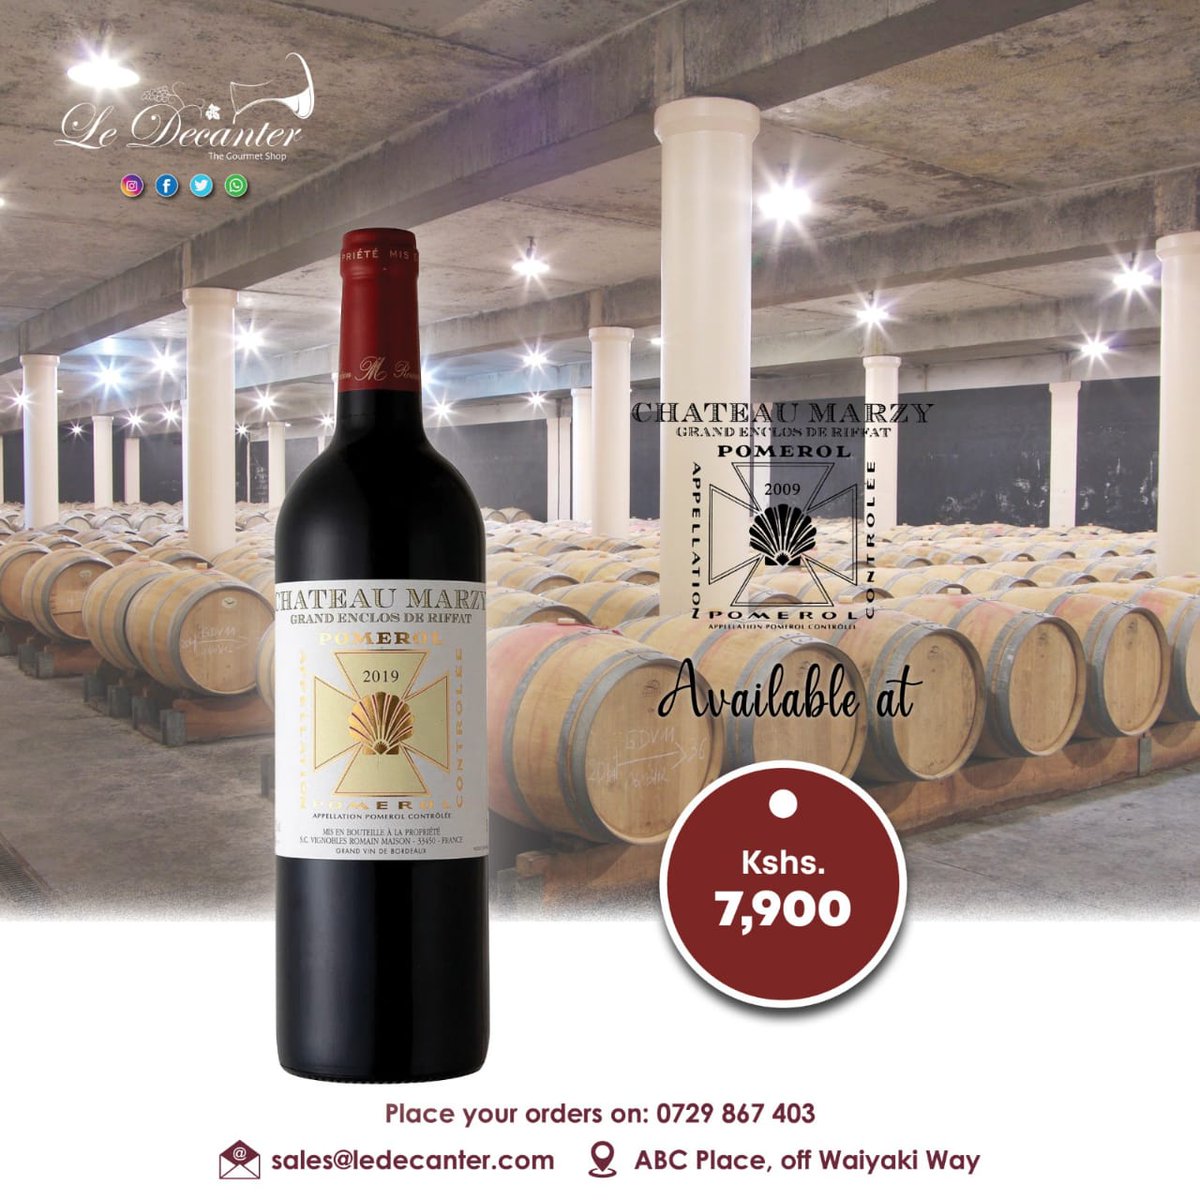 Chateau Marzy Pomerol pomerol is a red wine from Bordeaux region in France. It is a blend of Carbernet Sauvignon, Carbenet Franc and Merlot. It is bold and full bodied. Available at our shop for only 7,900/= To order kindly Call / WhatsApp us on 0729867403